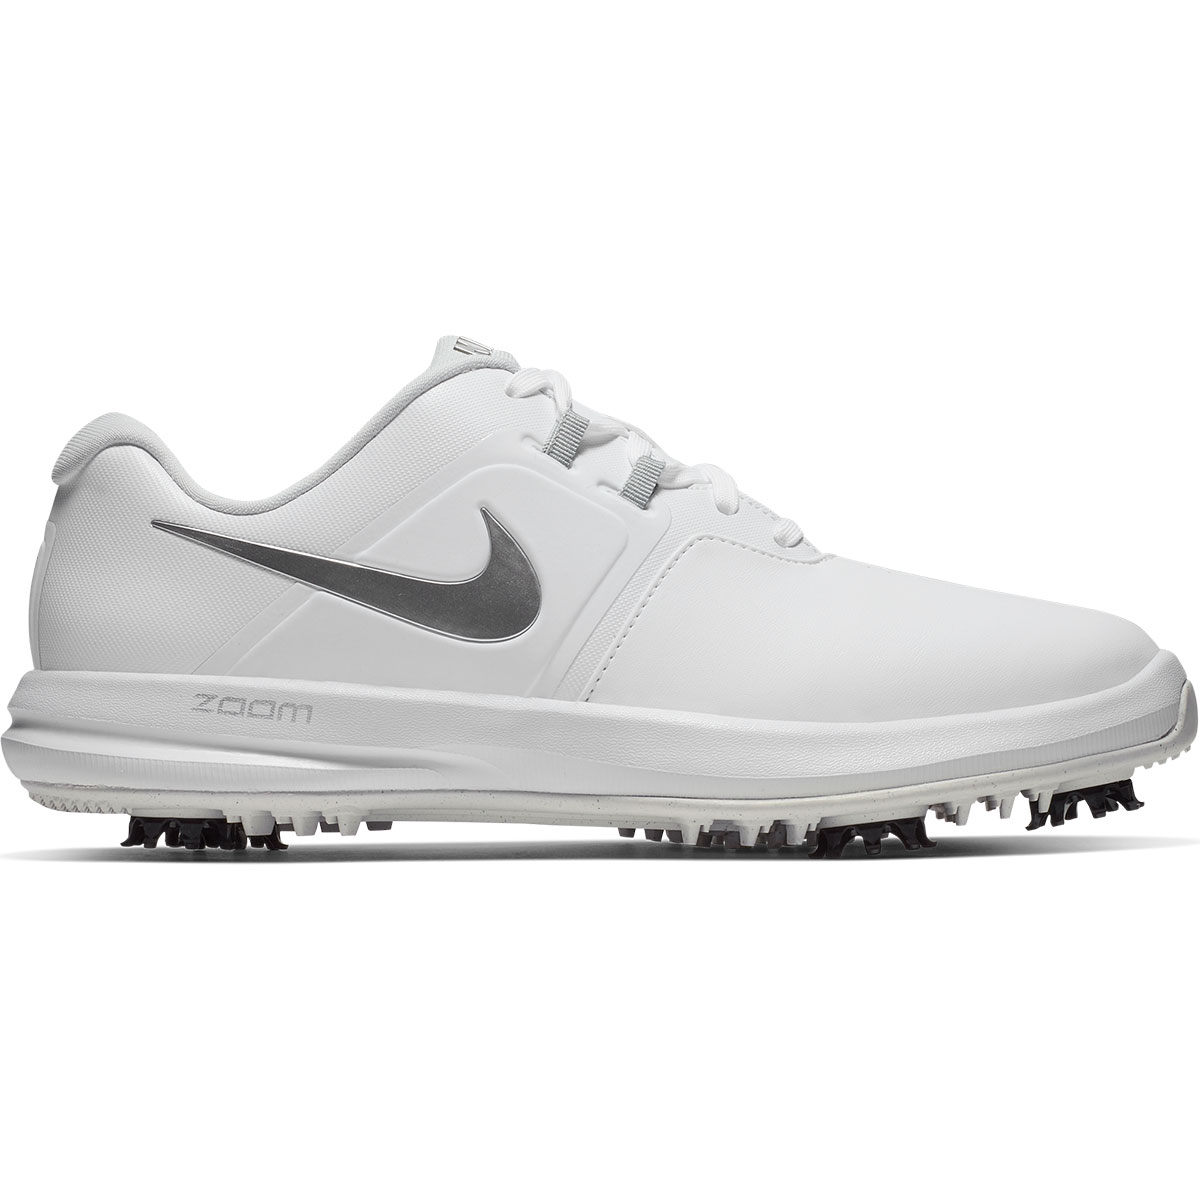 Ladies Air Zoom Spiked Golf Shoes from golf